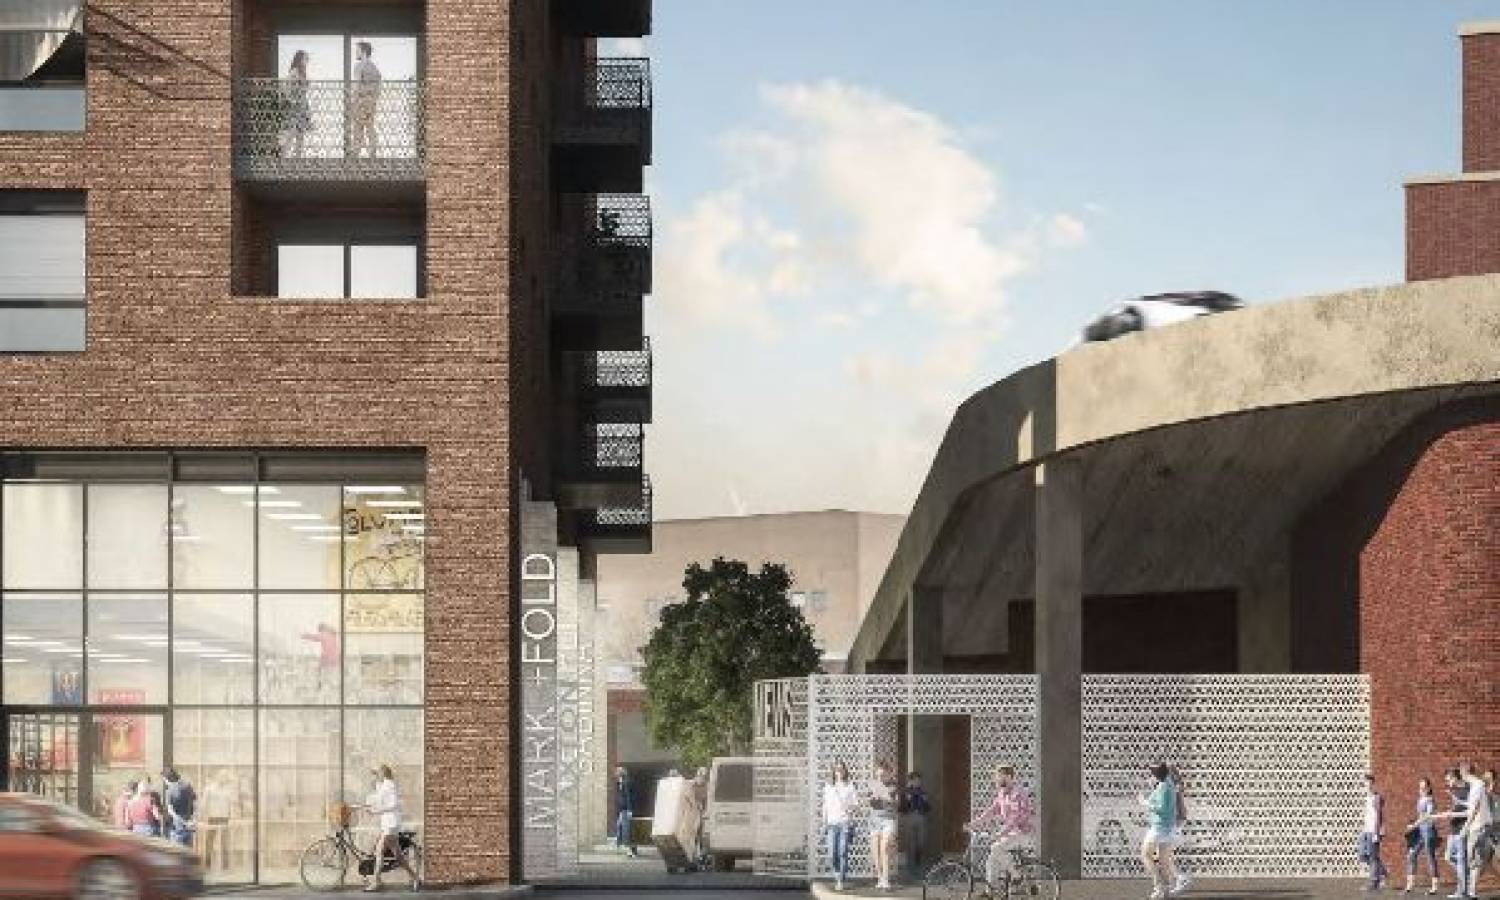 Weston Homes gets a £33m site in Wood Green